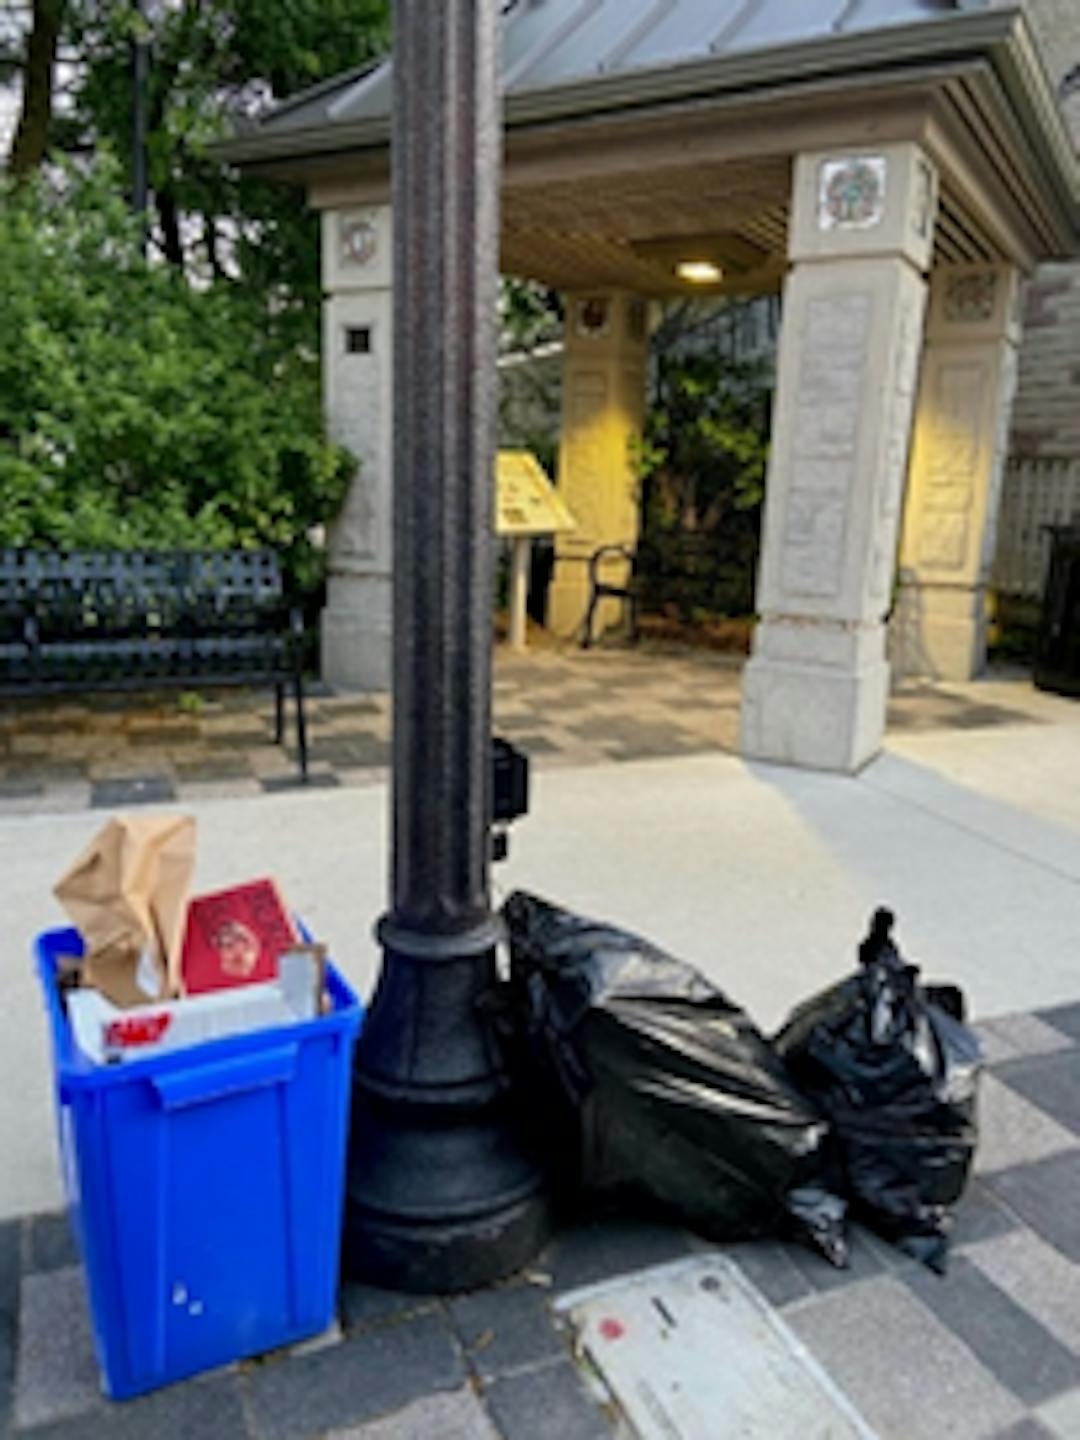 a blue box and two black garbage bags lying next to a street light along the curb